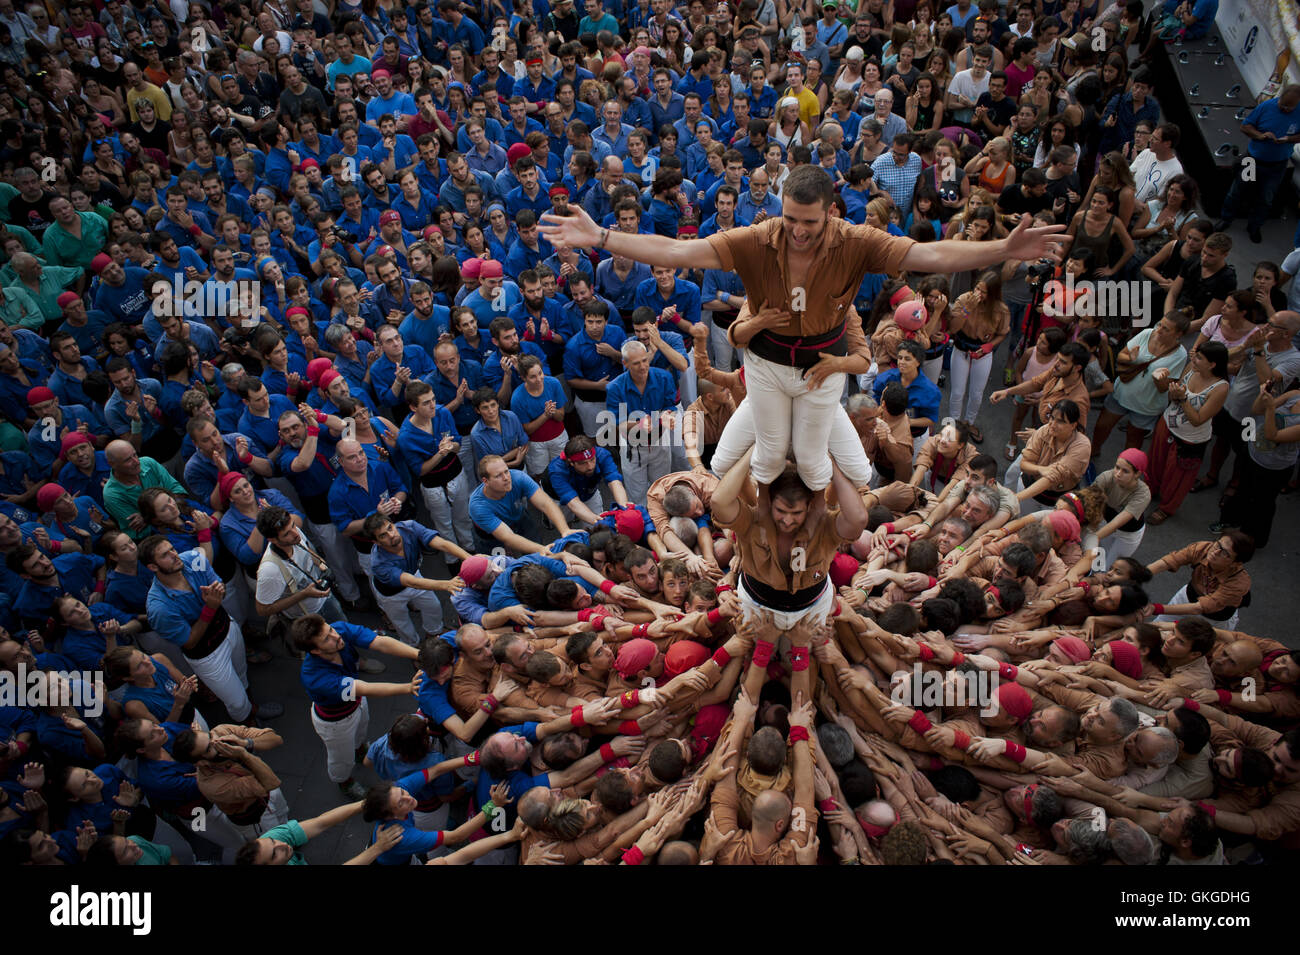 Barcelona, Catalonia, Spain. 20th Aug, 2016. Castellers (people who build human towers in Catalan) celebrate during Les Festes de Gracia. For the Gracia Quarter Summer Festival (Festes de Gracia) has been held the traditional Jornada Castellera (Human Towers Day) in the main square of the Catalan district. Credit:  Jordi Boixareu/ZUMA Wire/Alamy Live News Stock Photo